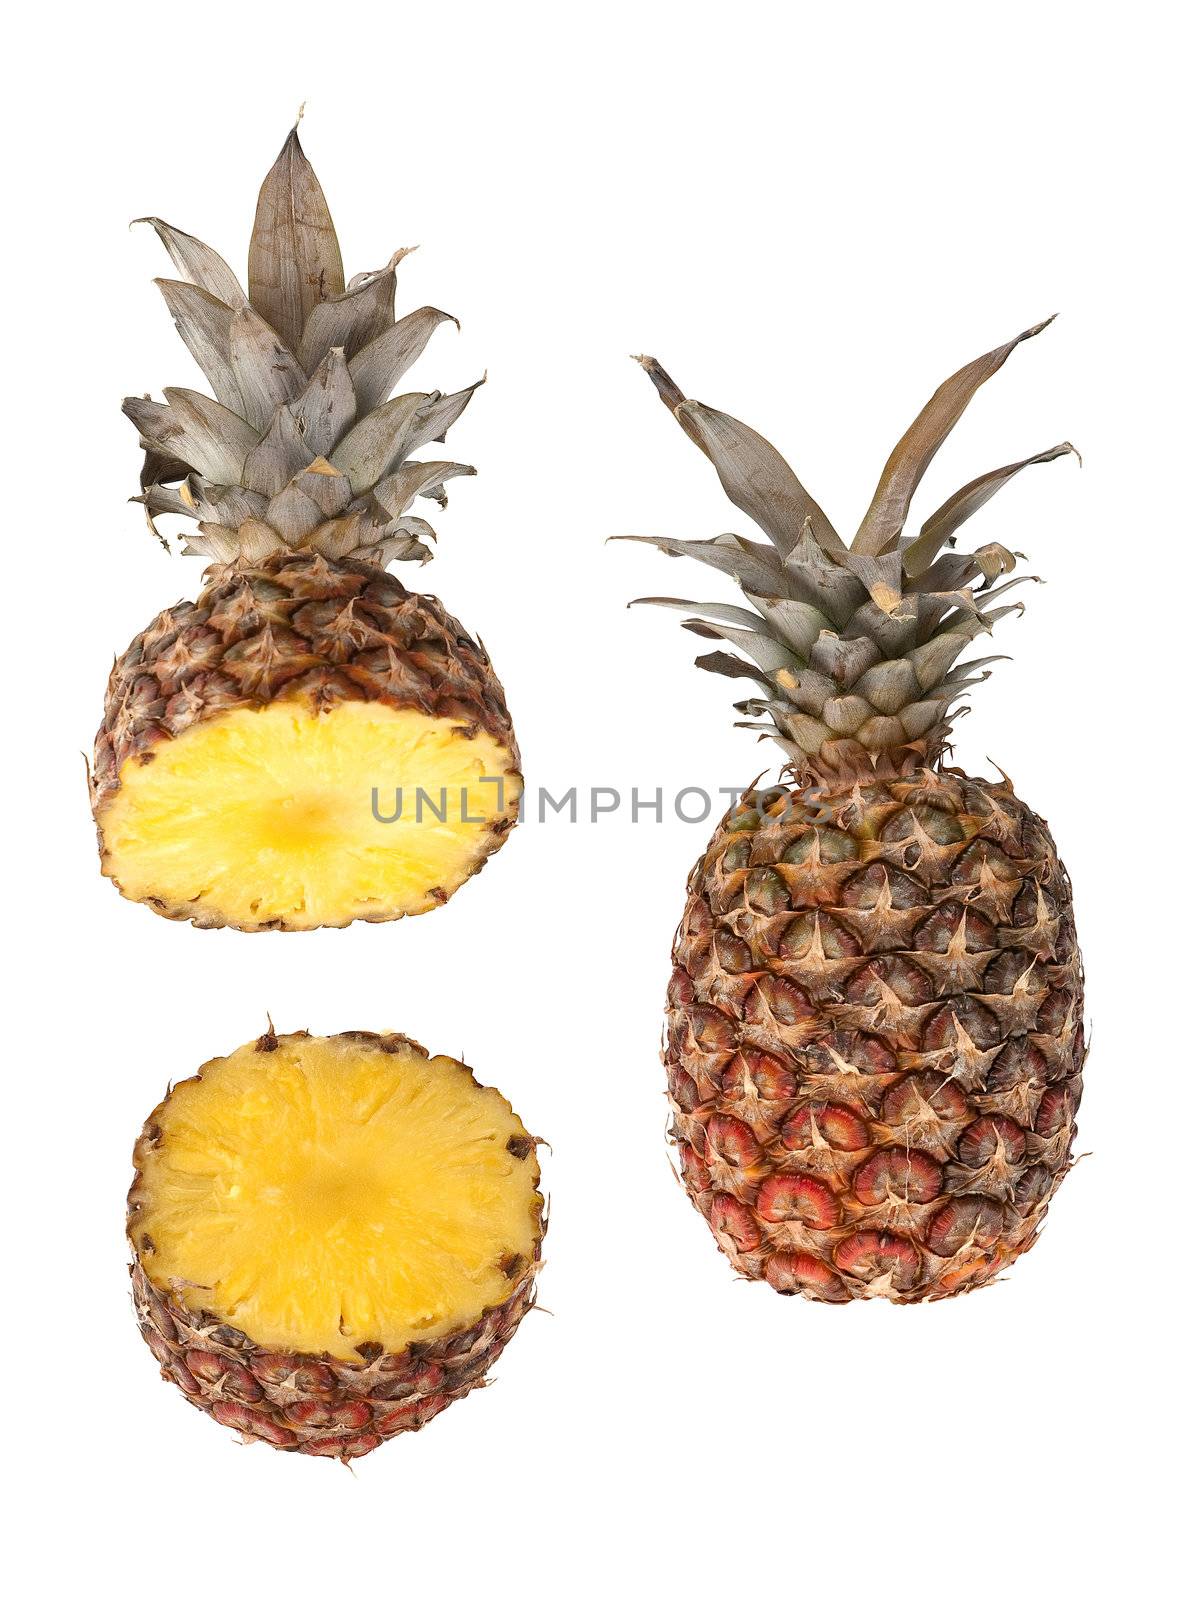 Whole and half pinapple detail isolated on white background.